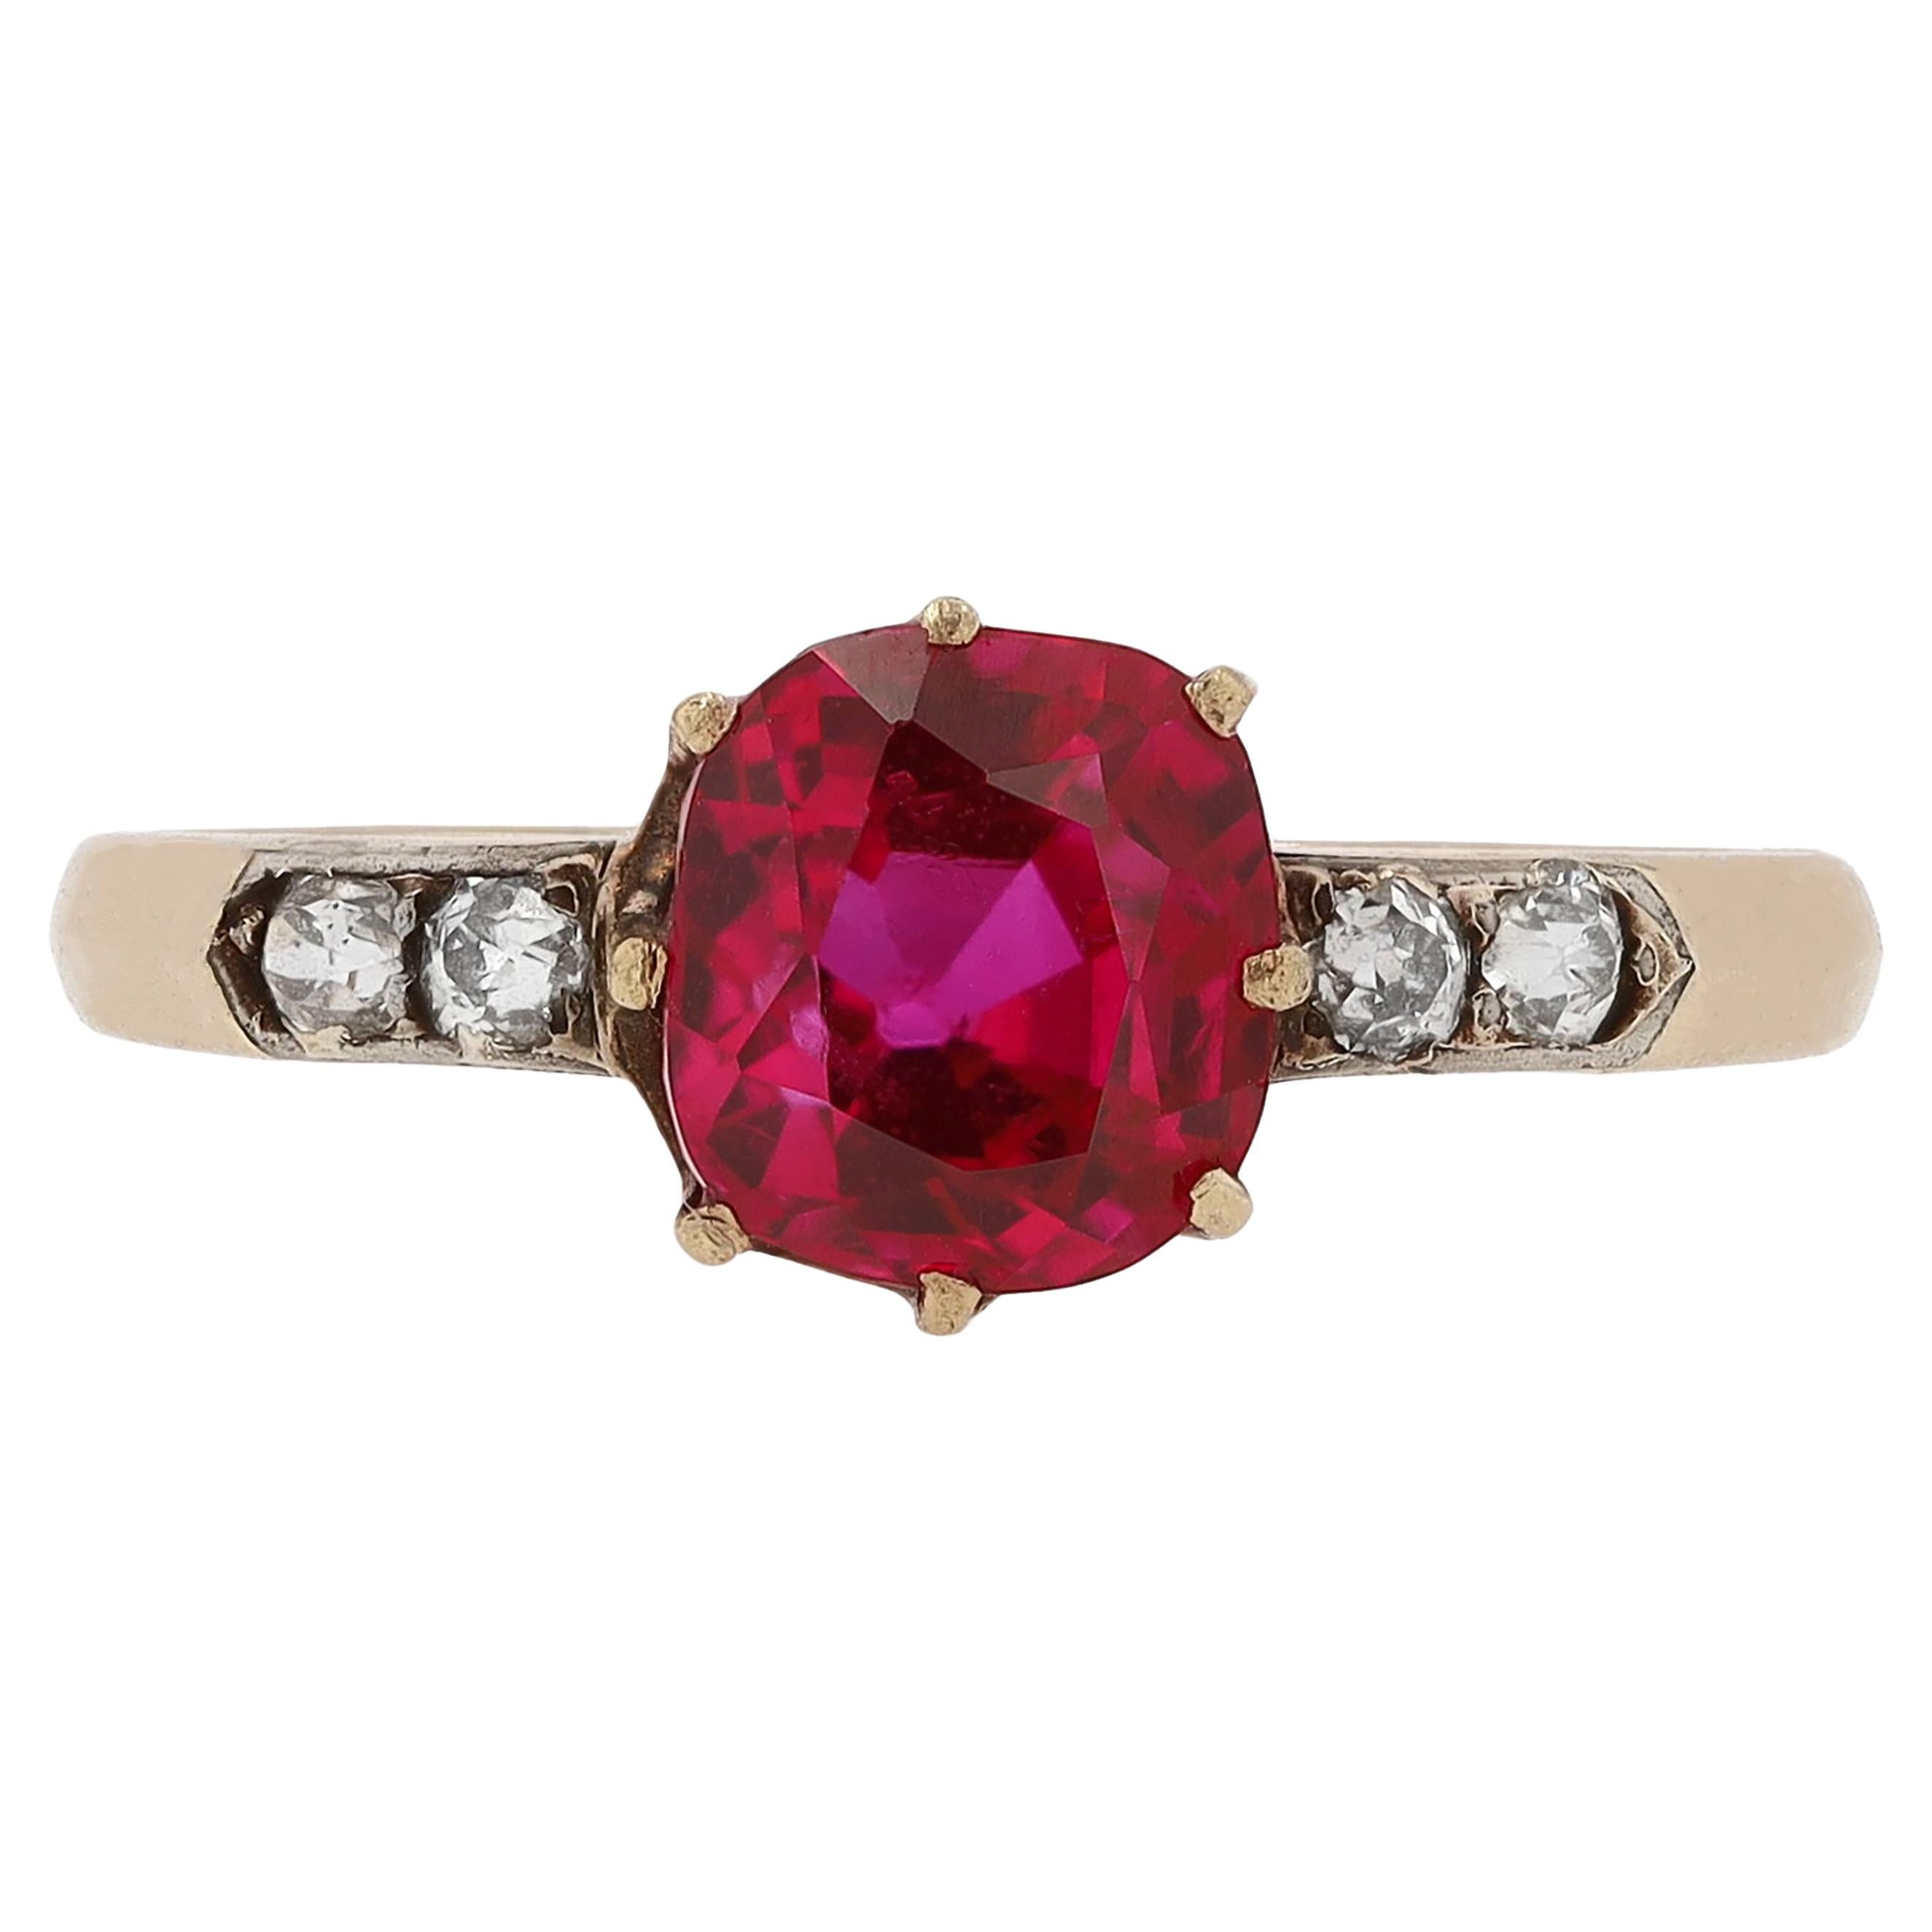 The Best Antique Victorian No Heat 1.86 Carat Burmese Ruby Ring For Sale